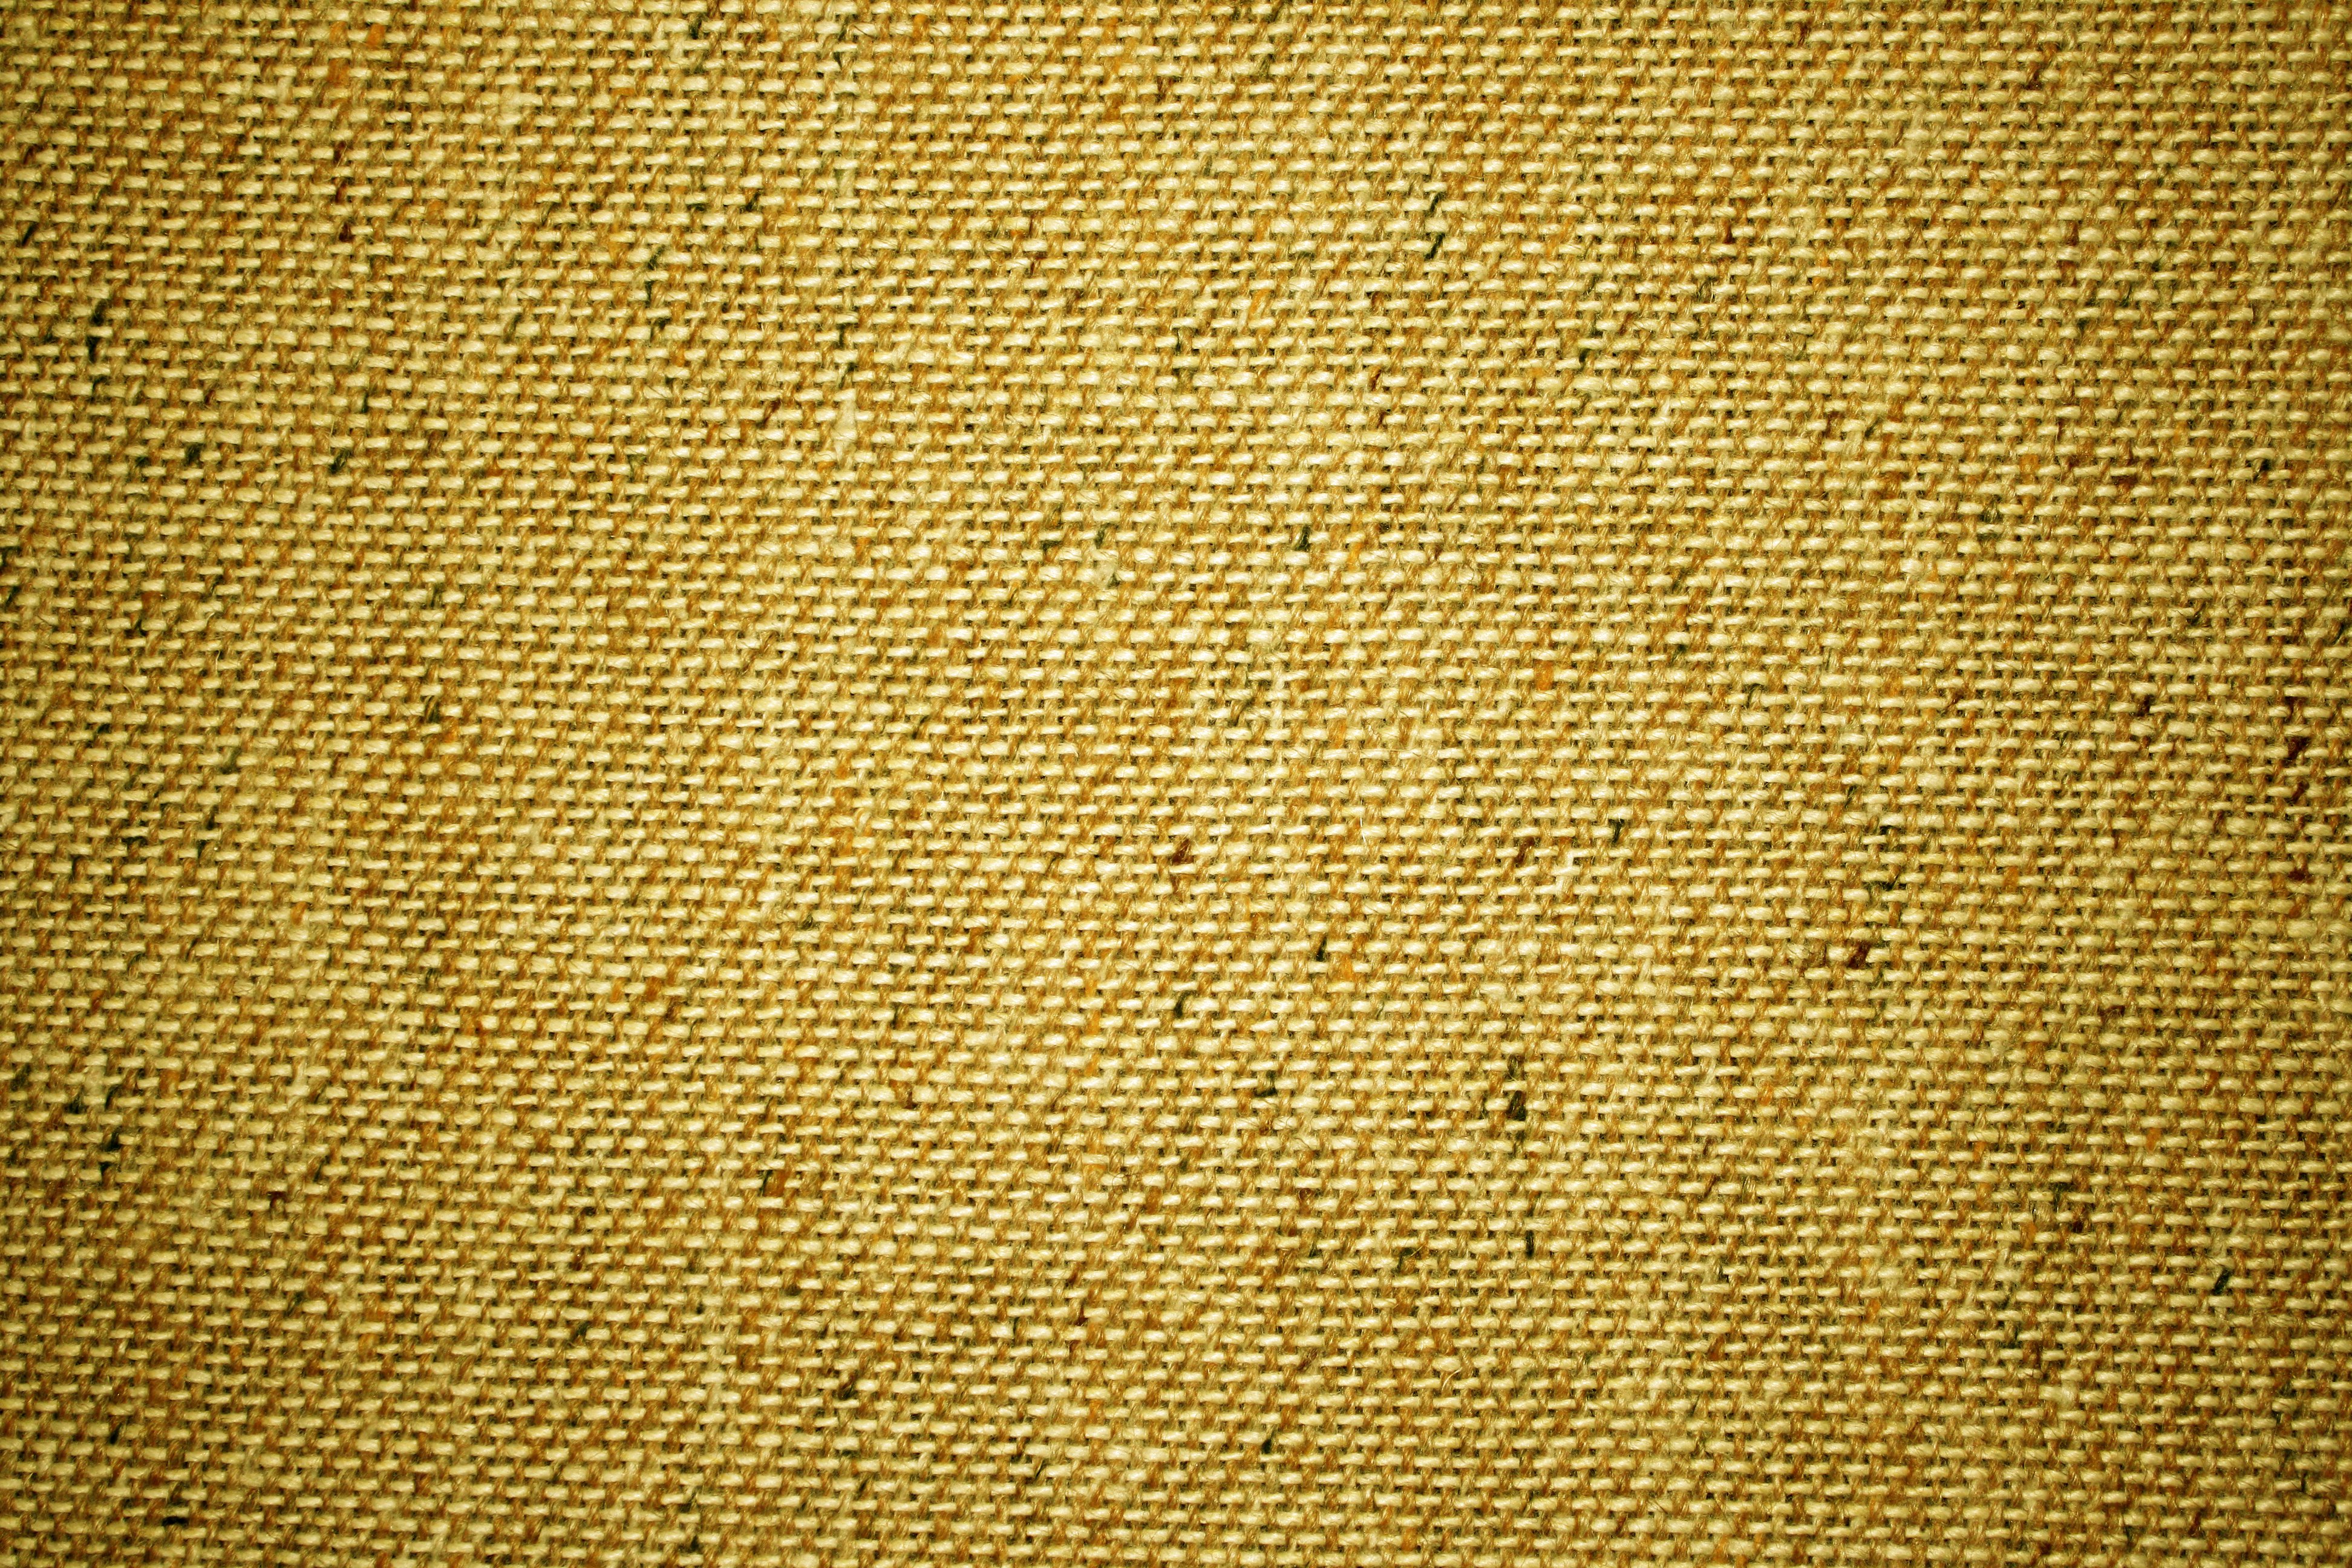 Golden Yellow Upholstery Fabric Close Up Texture Picture | Free ...